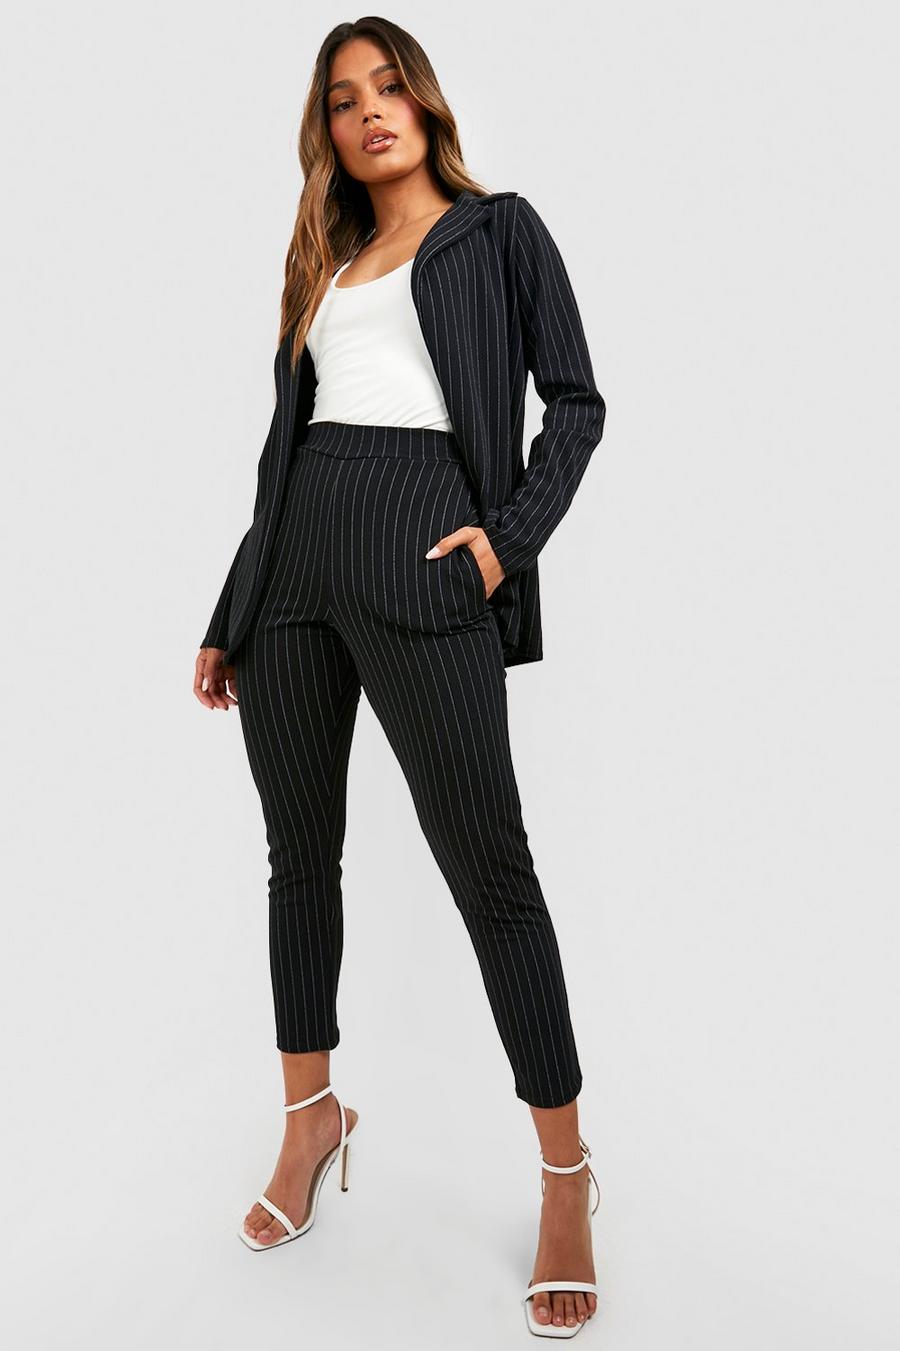 Black Pinstripe Tailored Blazer And Pants Two-Piece Suit